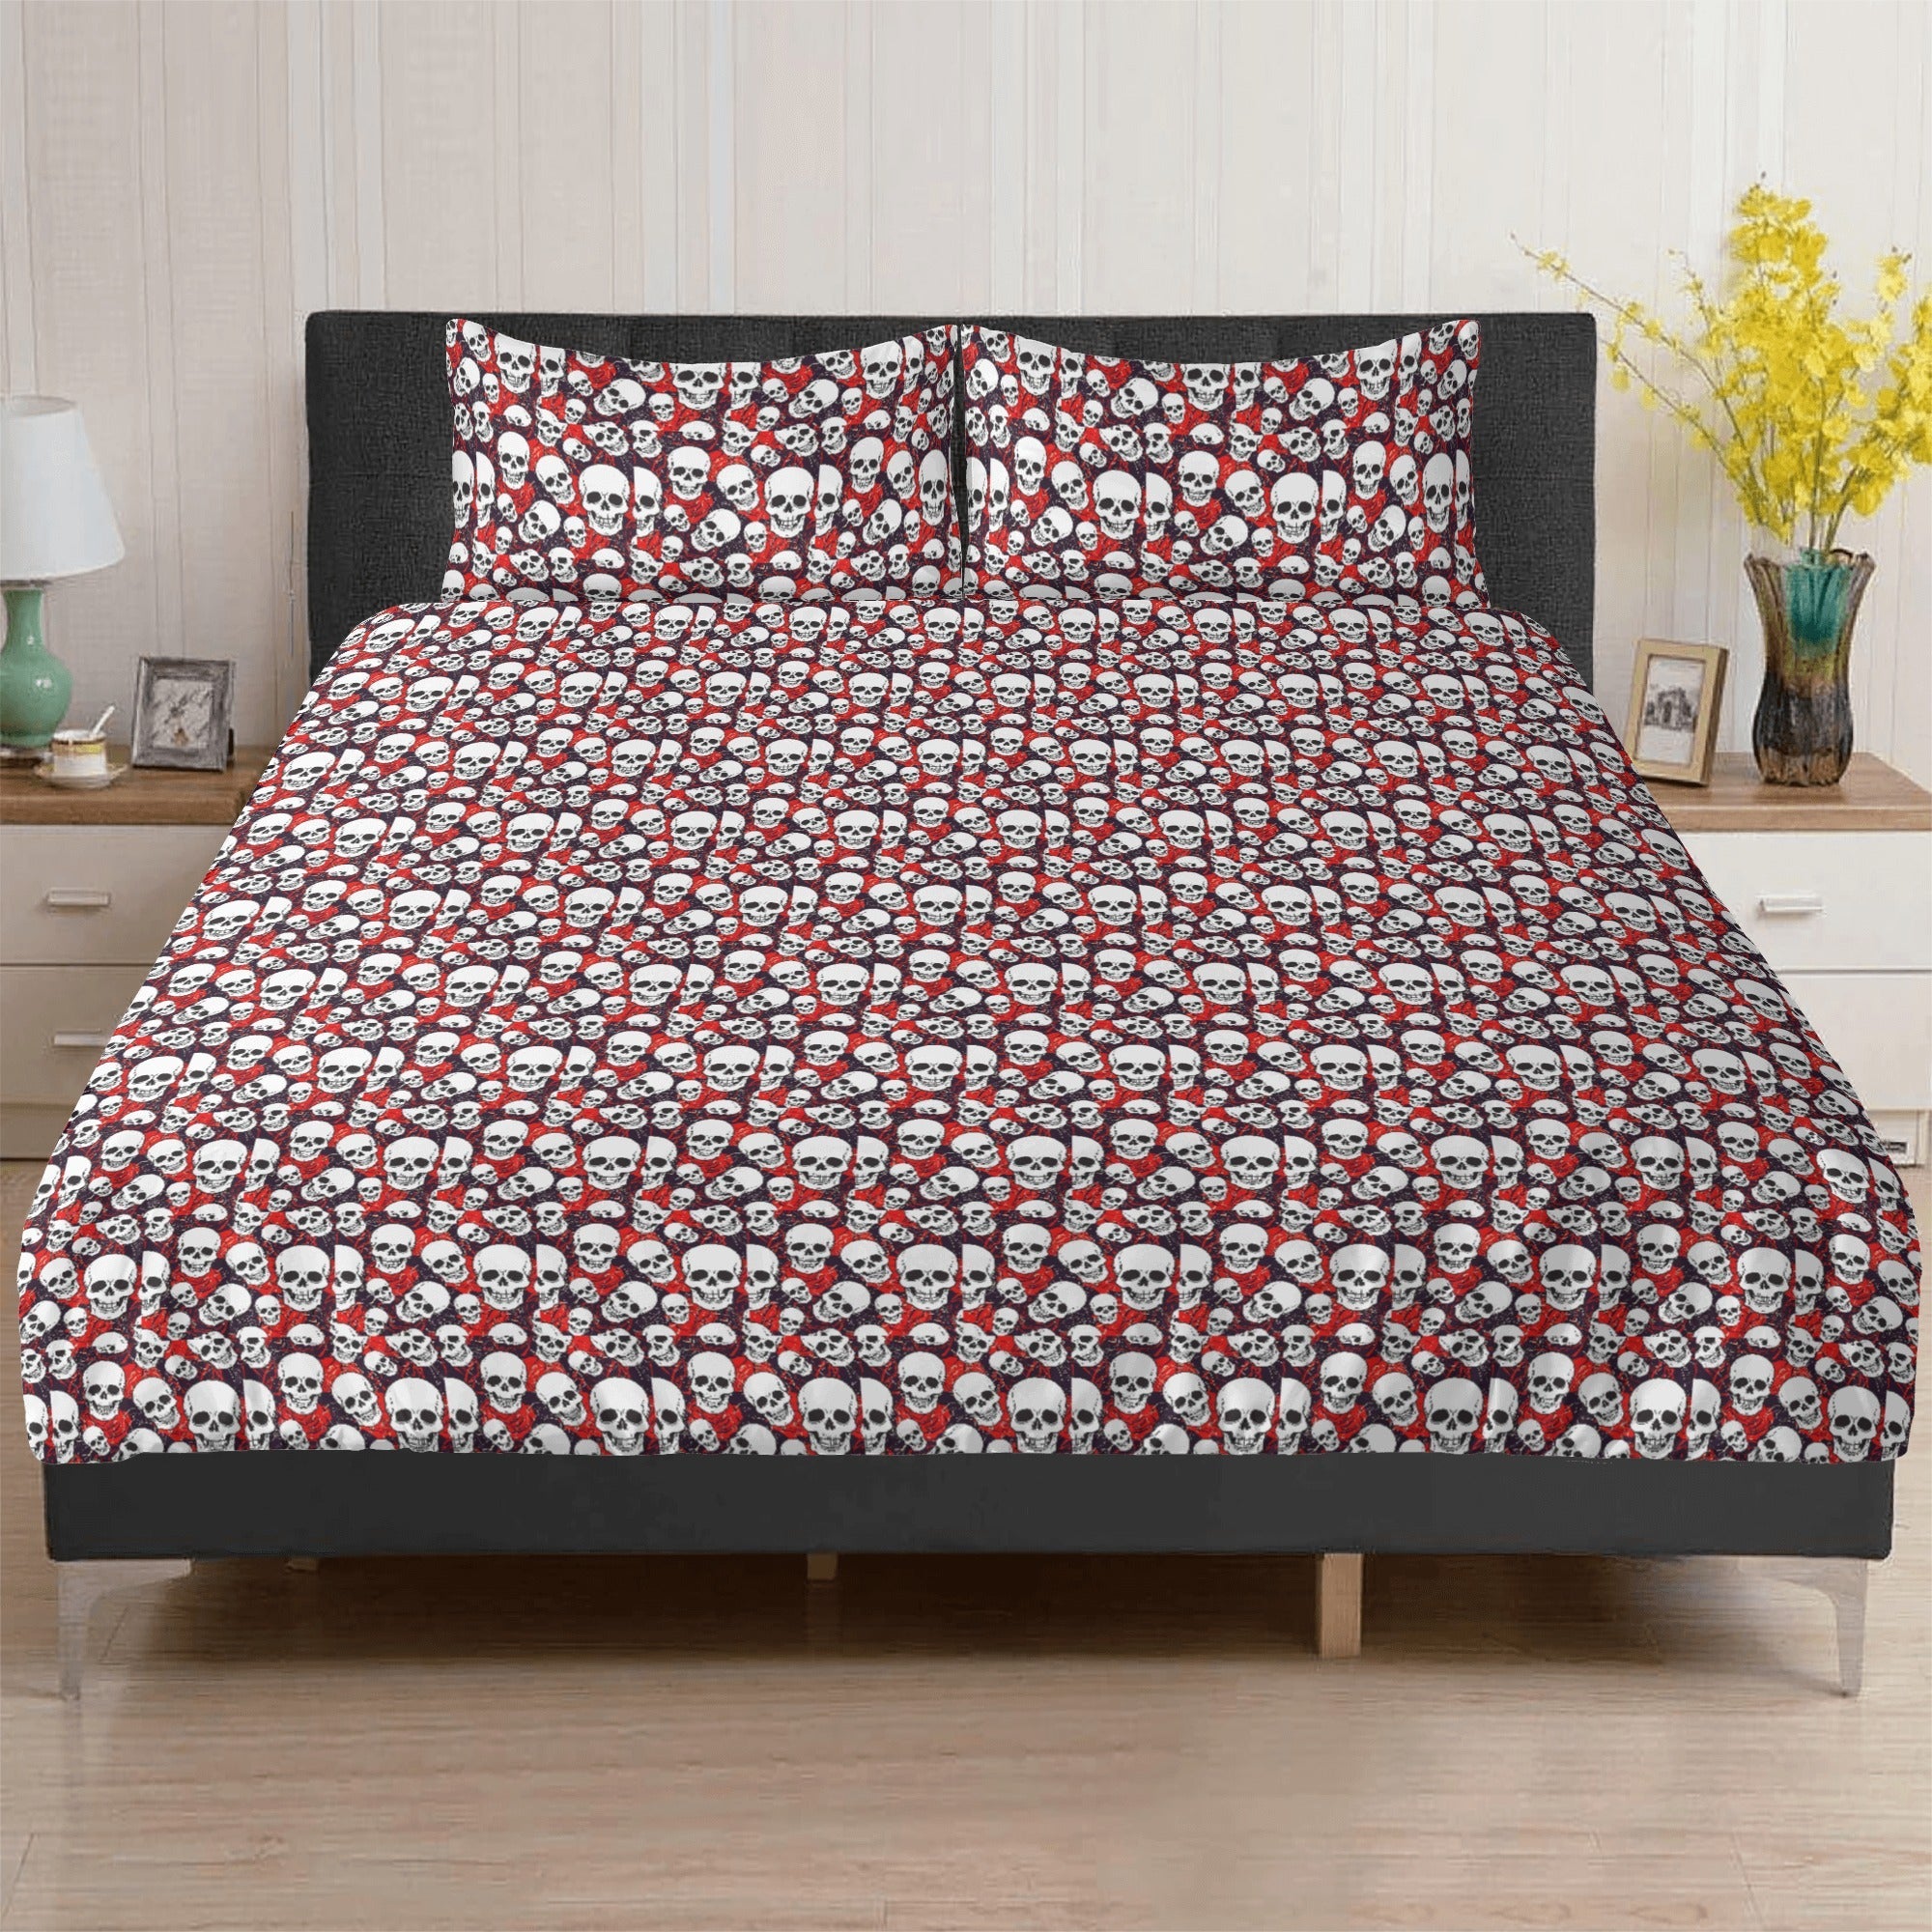 QUILT AND PILLOW COVERS | SKULLS | BLACK | 12 SIZES - Single Track Dreamer